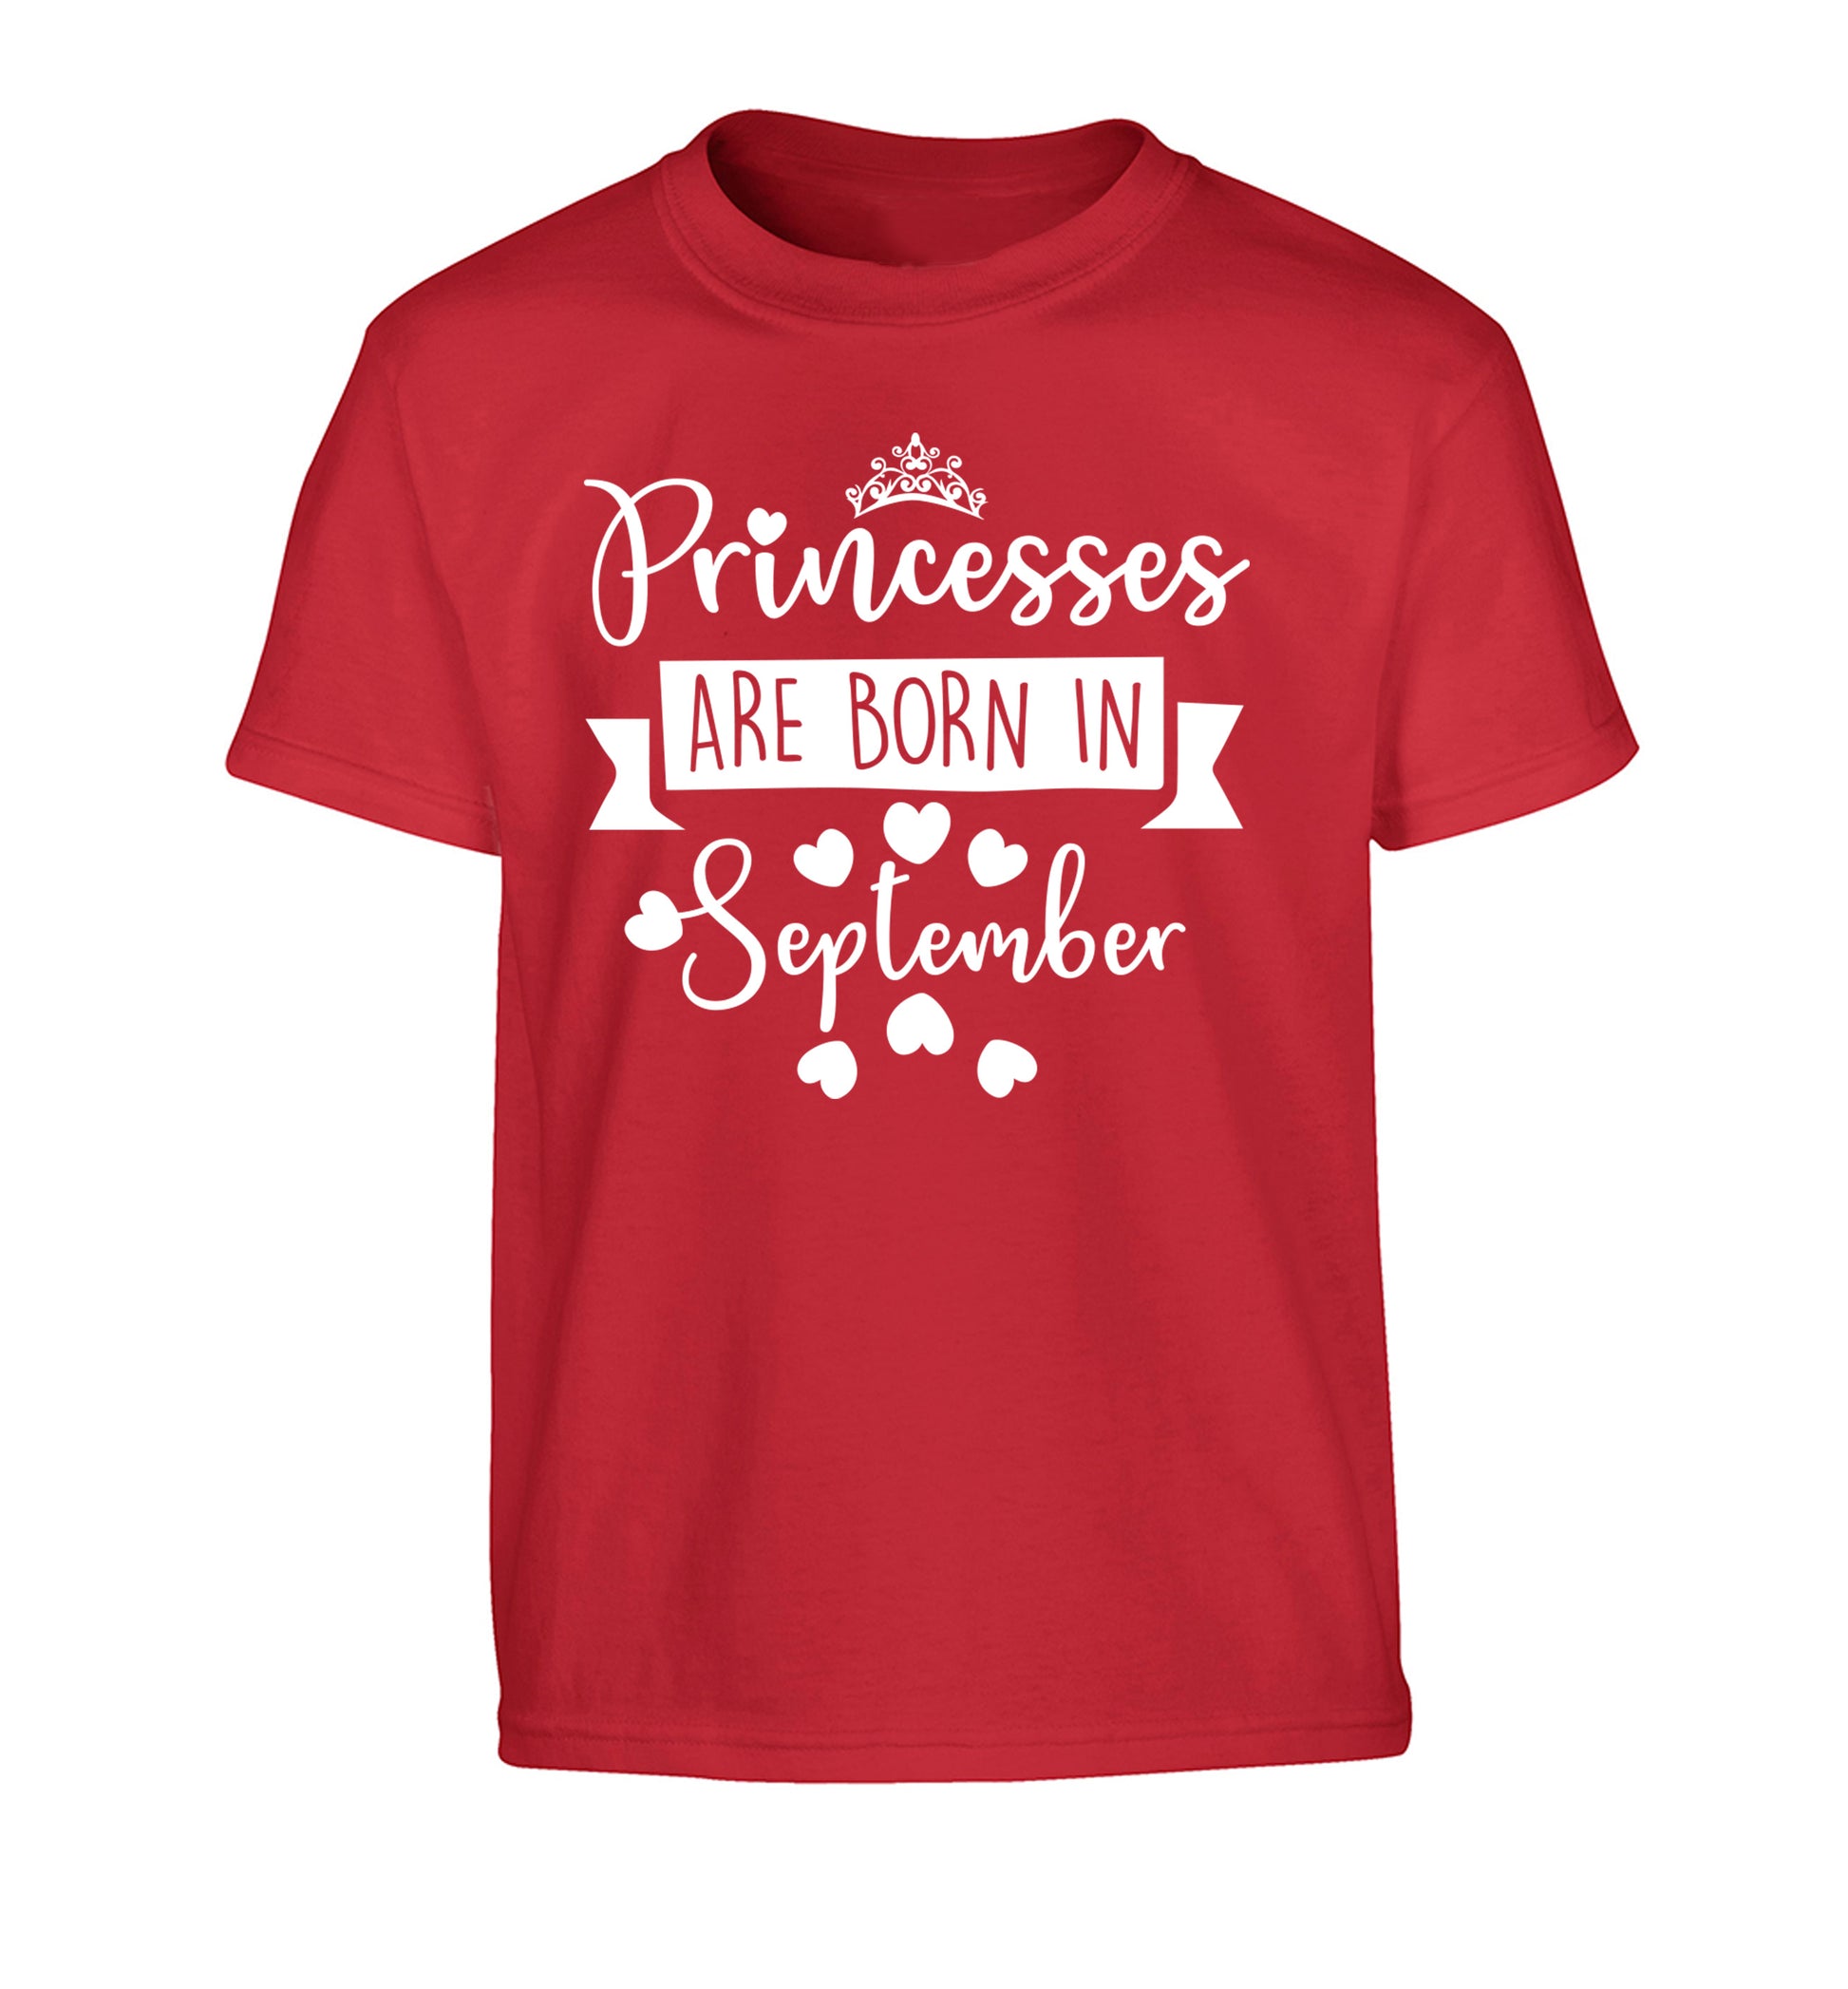 Princesses are born in September Children's red Tshirt 12-13 Years